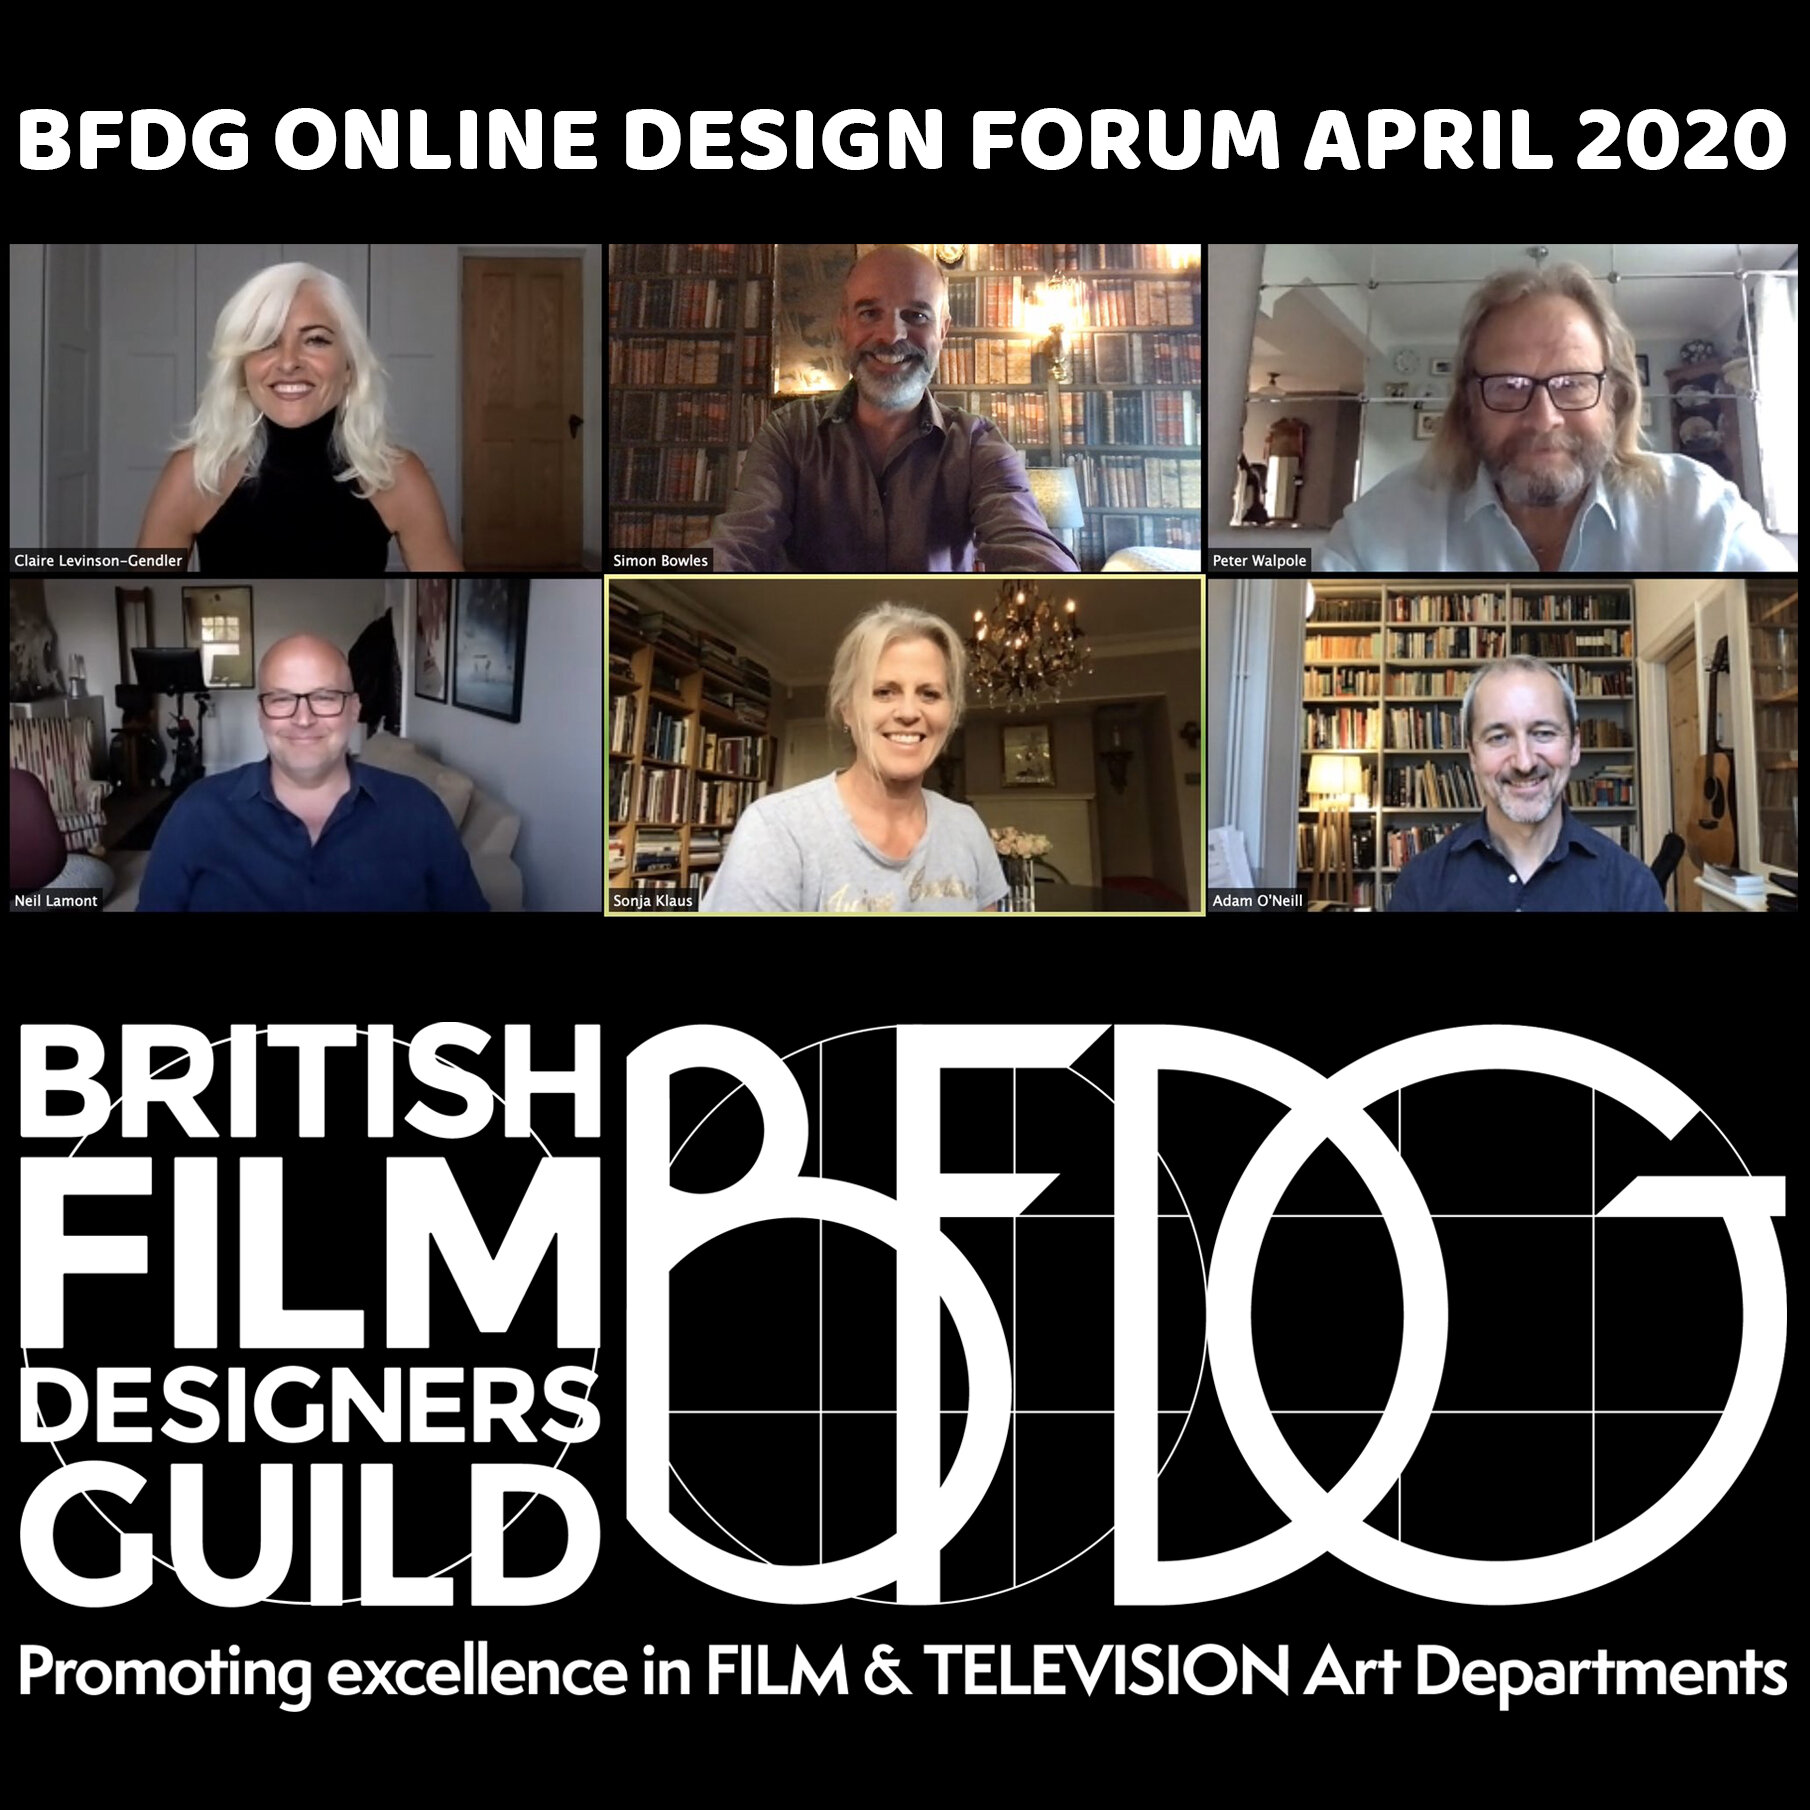 ONLINE PANEL OF PRODUCTION DESIGNERS (CLICK TO WATCH)